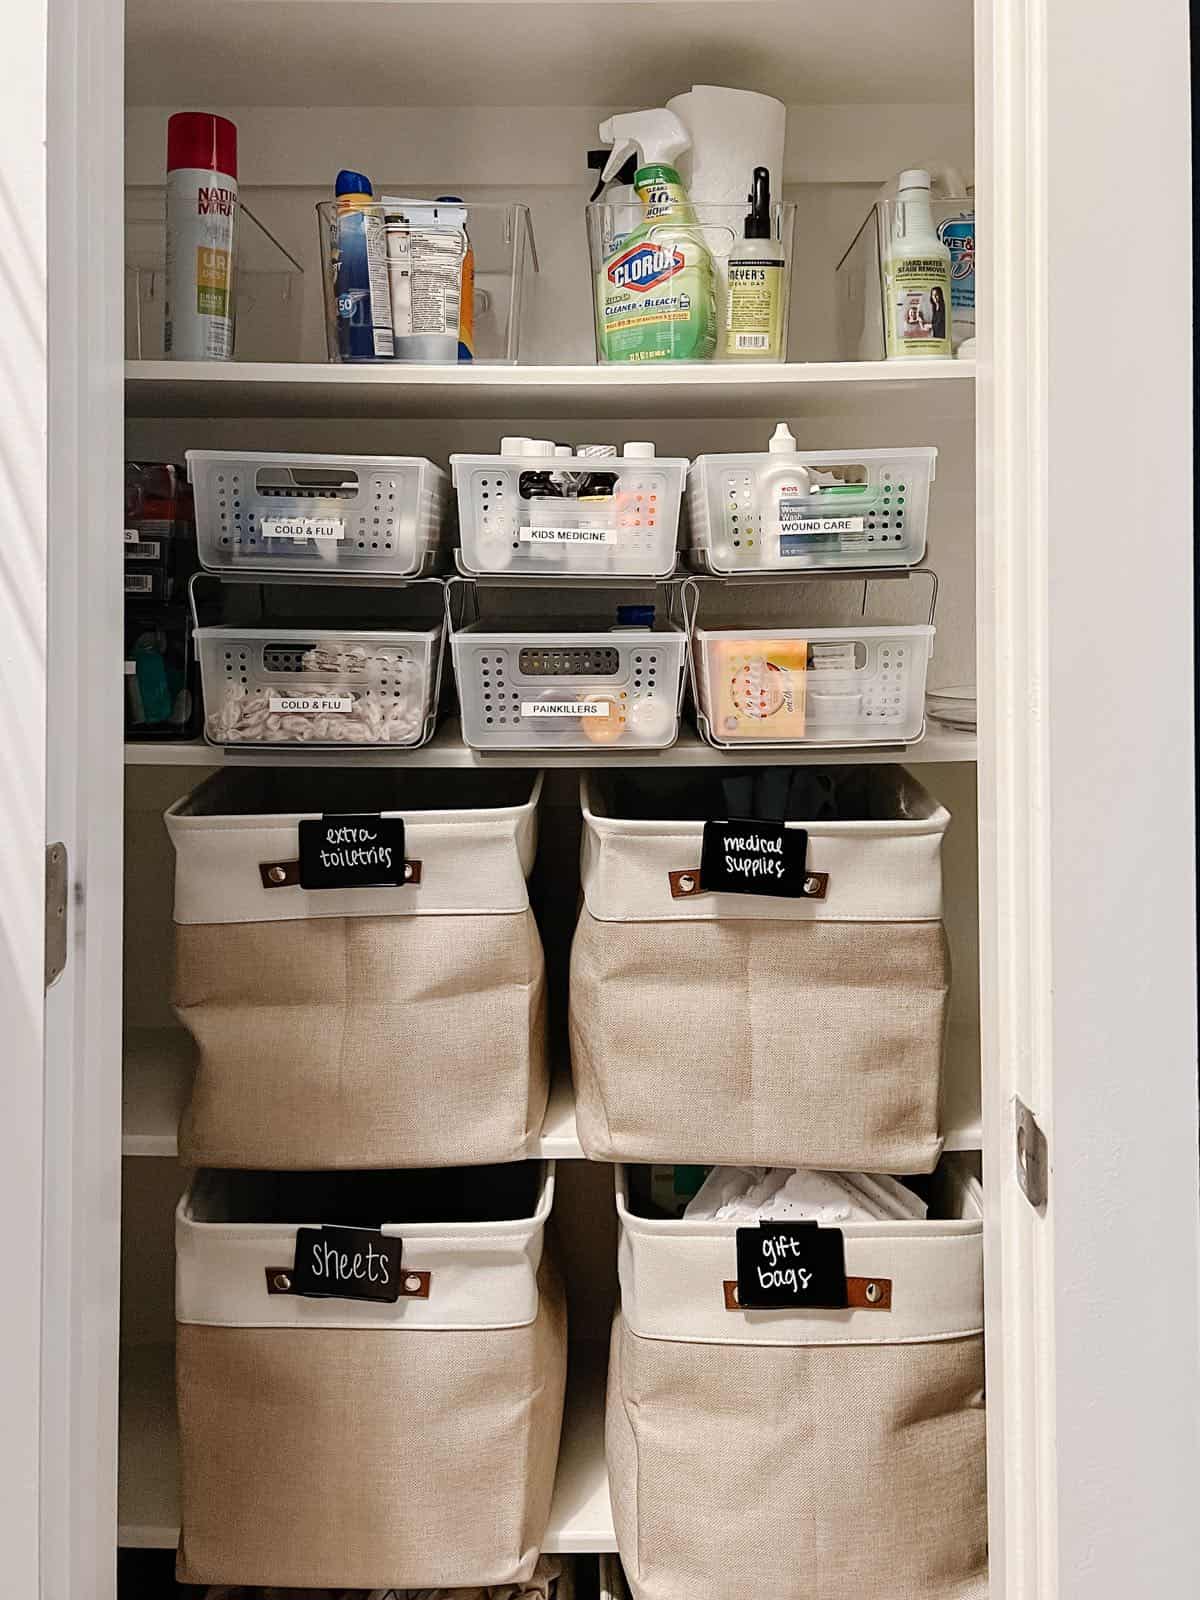 Simple Steps For Organizing The Linen Closet Like A Professional Organizer